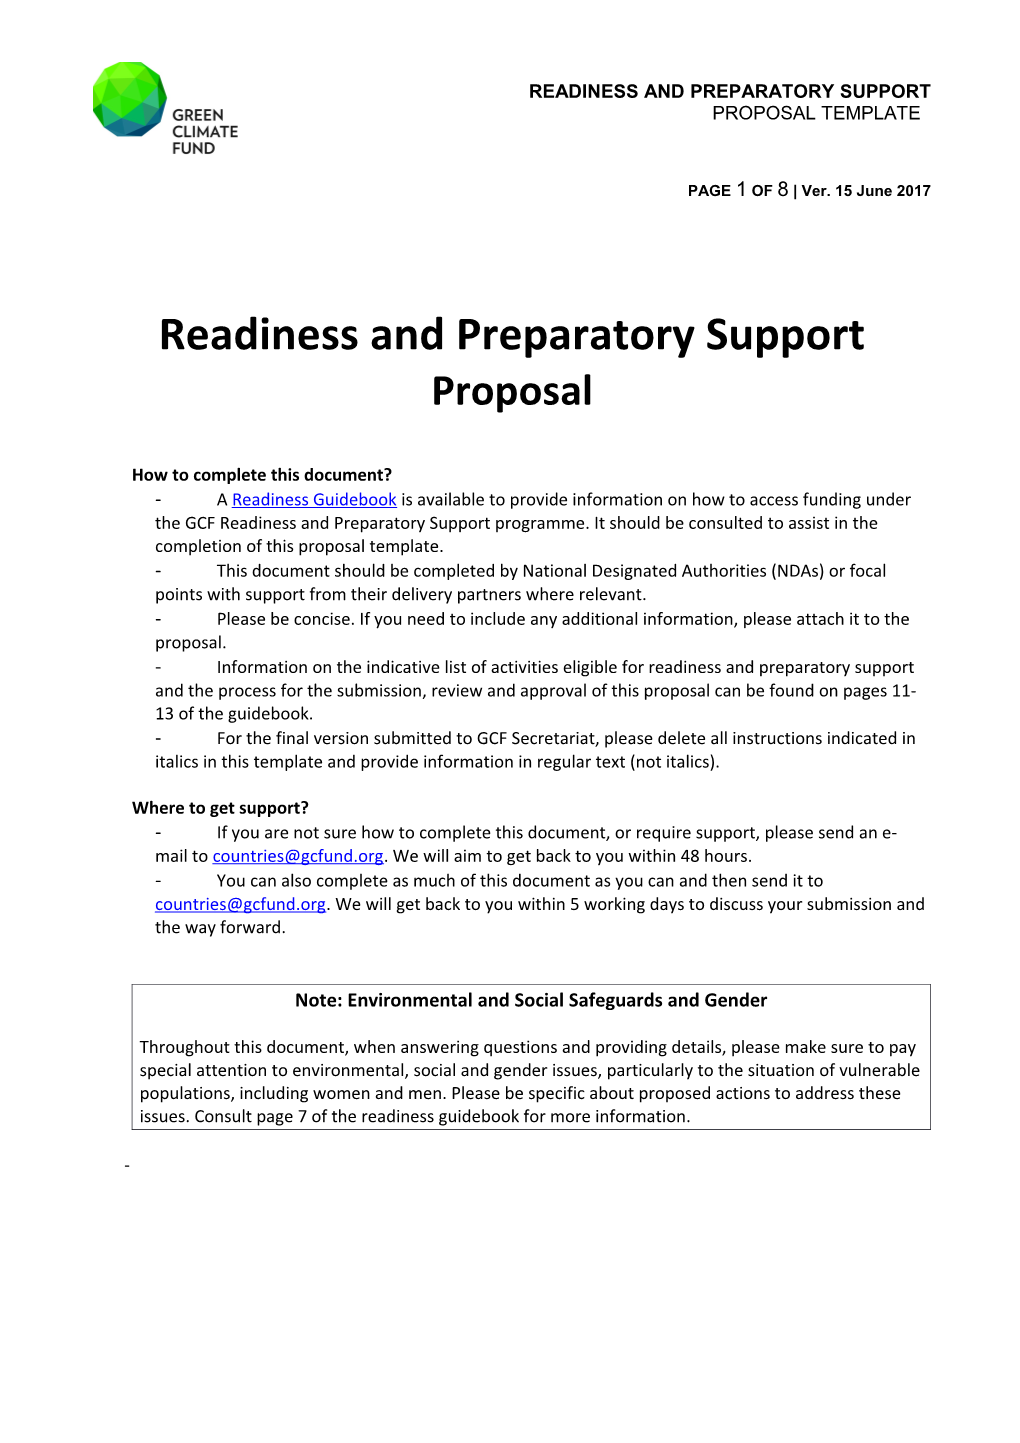 Readiness and Preparatory Support